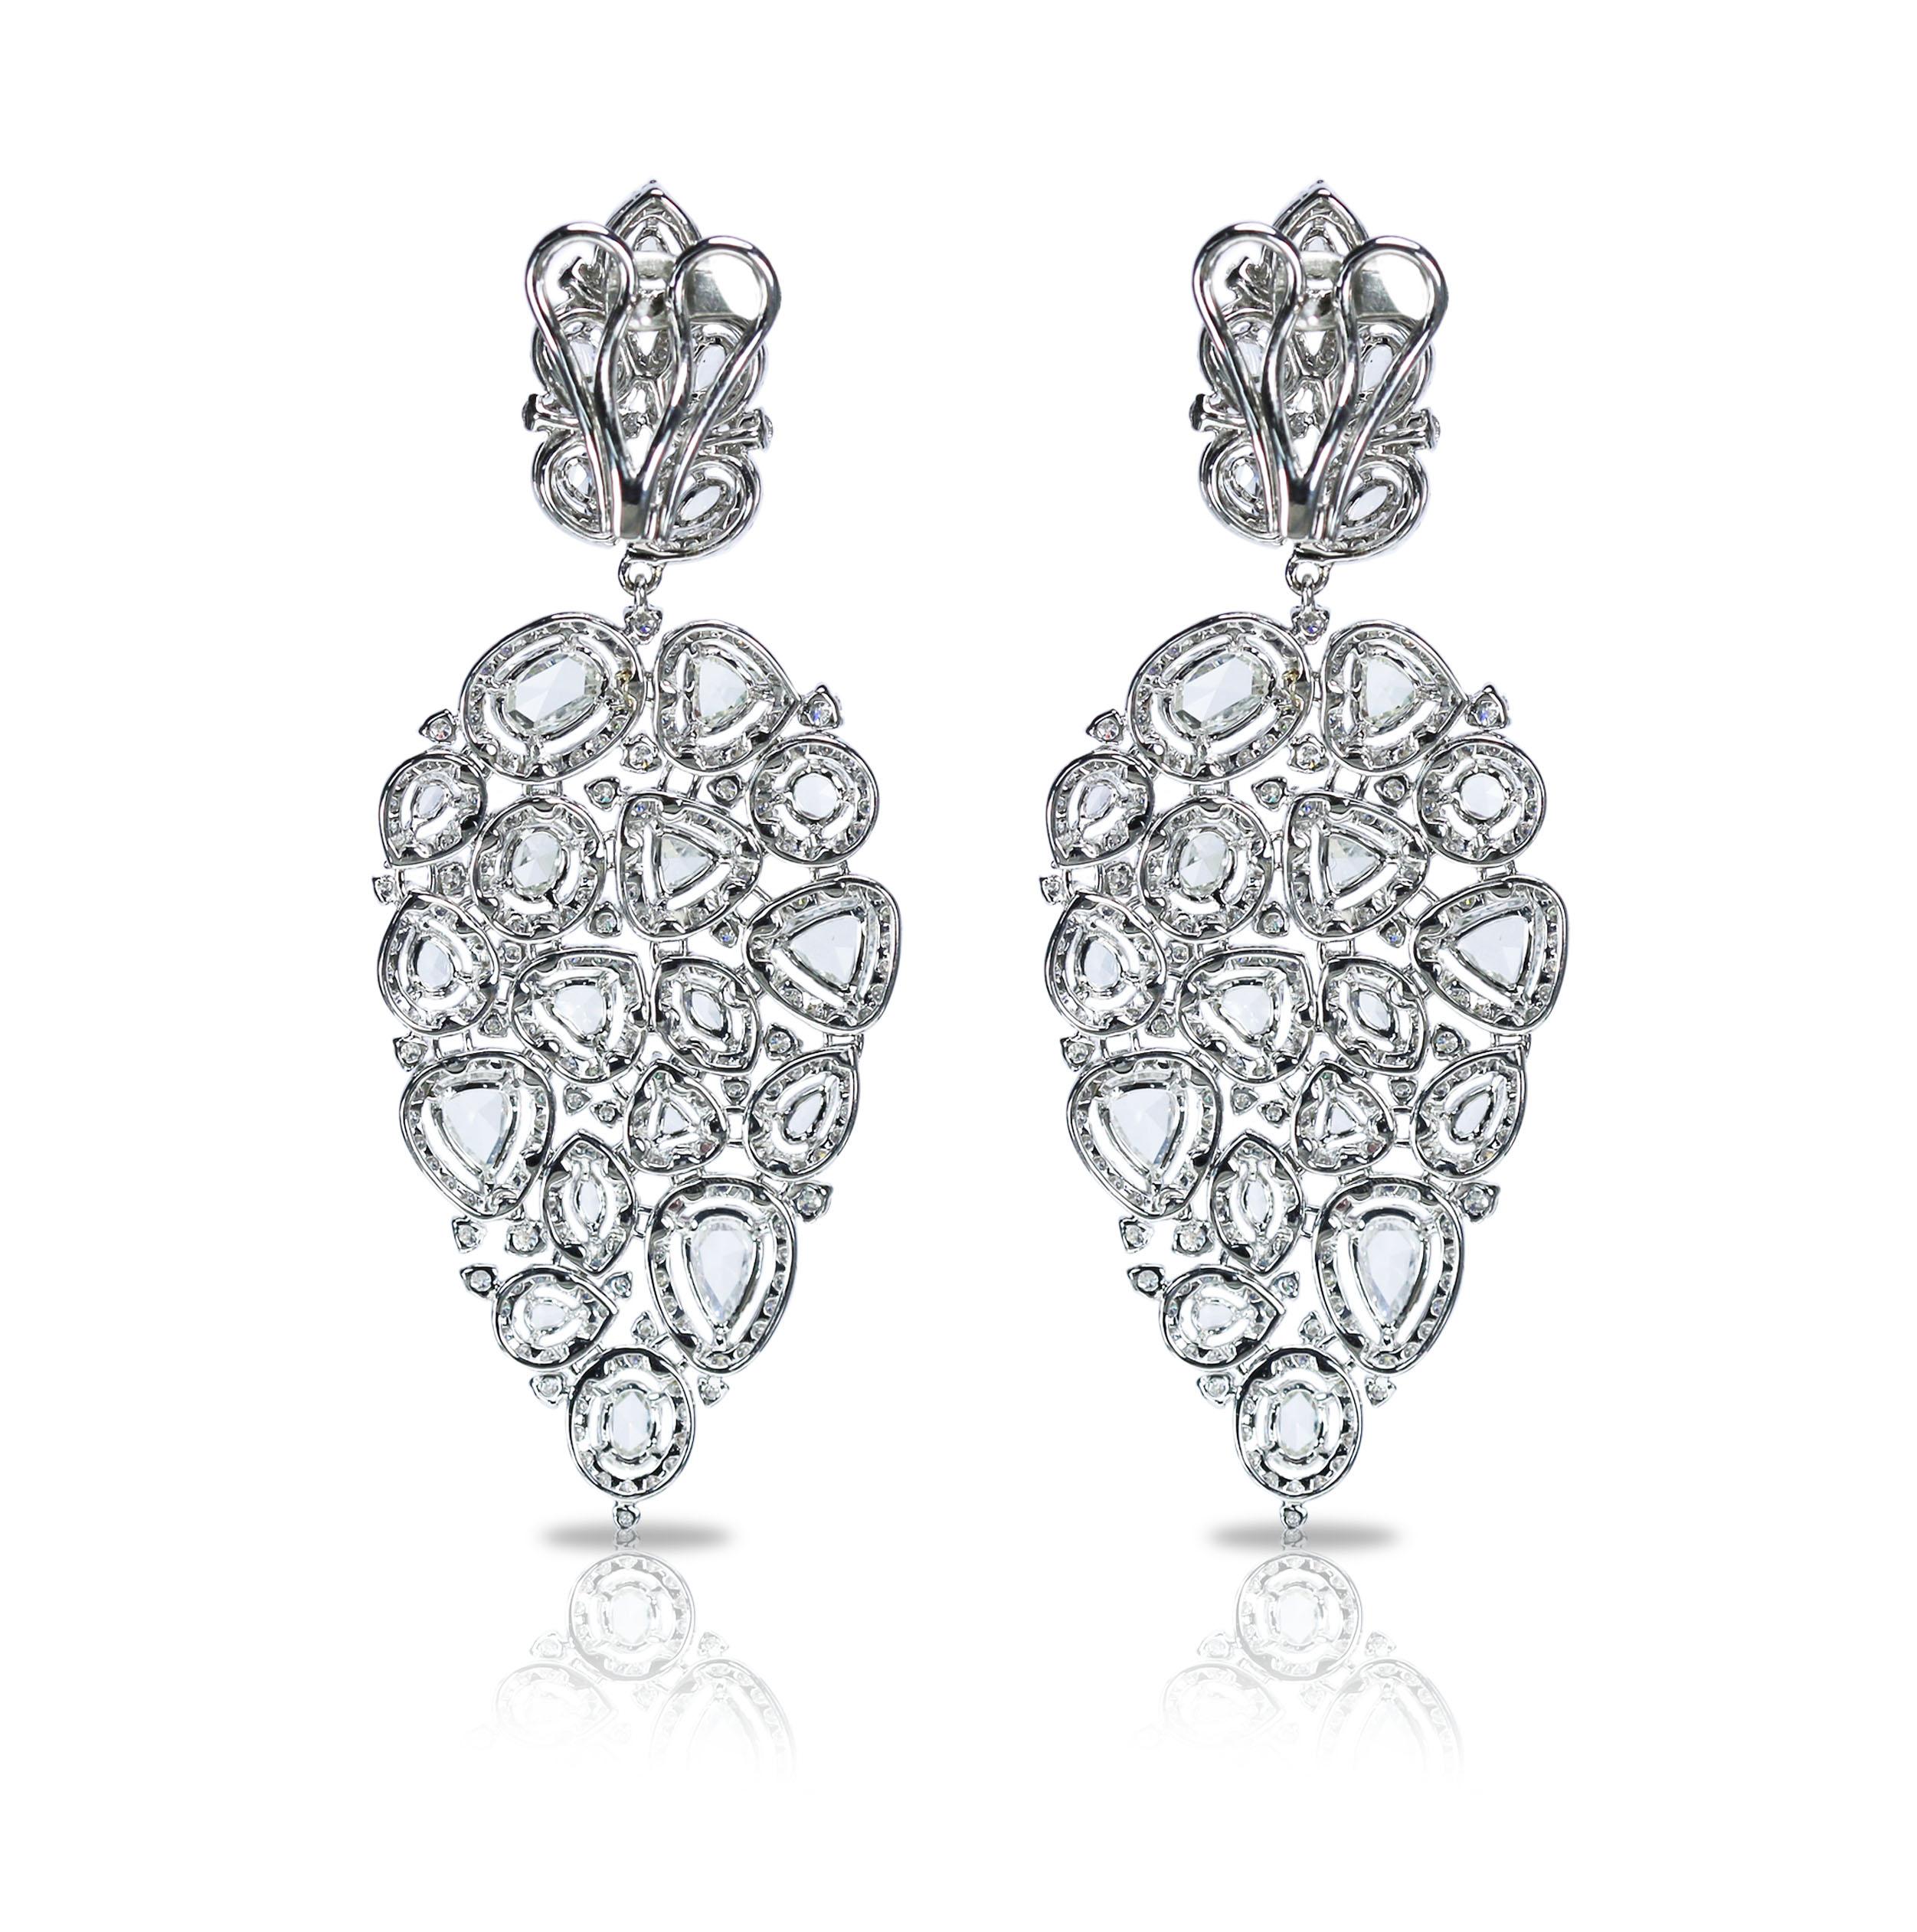 F-G-H-I/ VS-SI brilliant cut and rosecut diamond earrings 

Inspired by the high-shine luminescence of diamonds, we unveil this masterpiece painstakingly crafted using 695 F-G-H-I/ VS-SI brilliant cut and rosecut diamonds in a prong setting. This